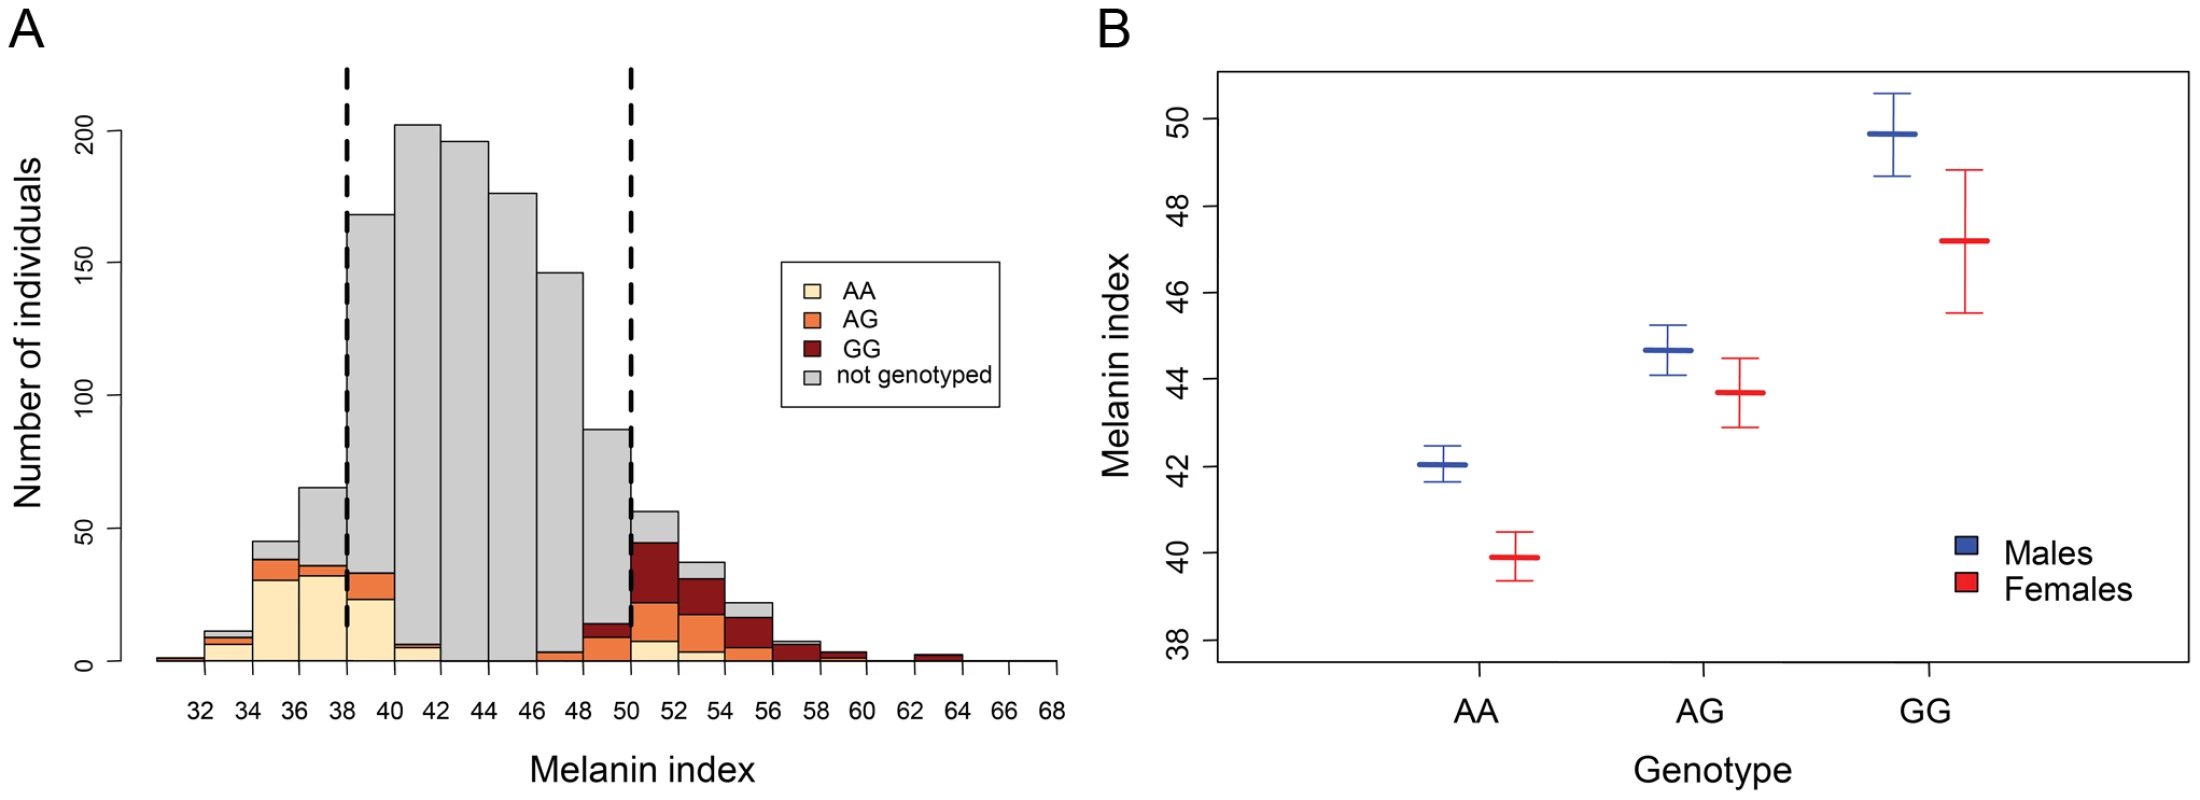 Association of rs1426654 genotypes with melanin index.